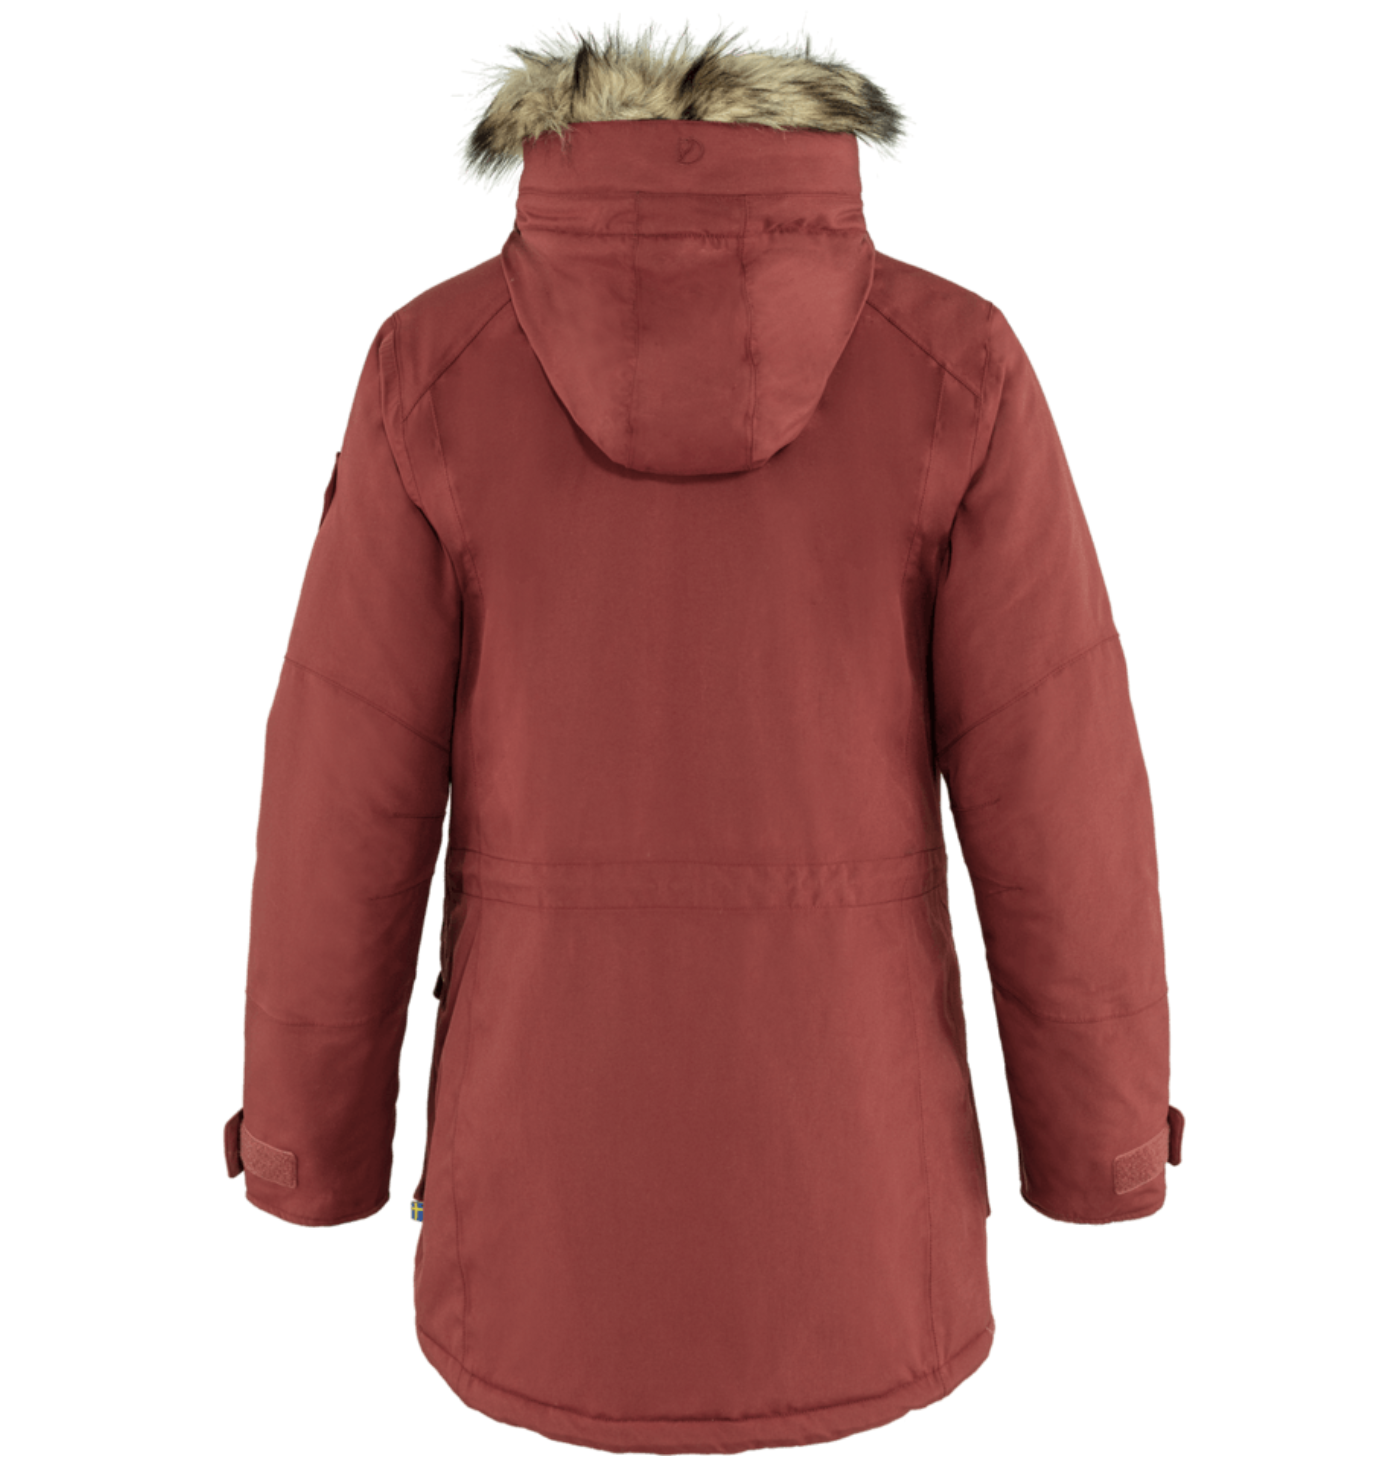 Fjallraven Nuuk Parka womens - We're Outside Outdoor Outfitters